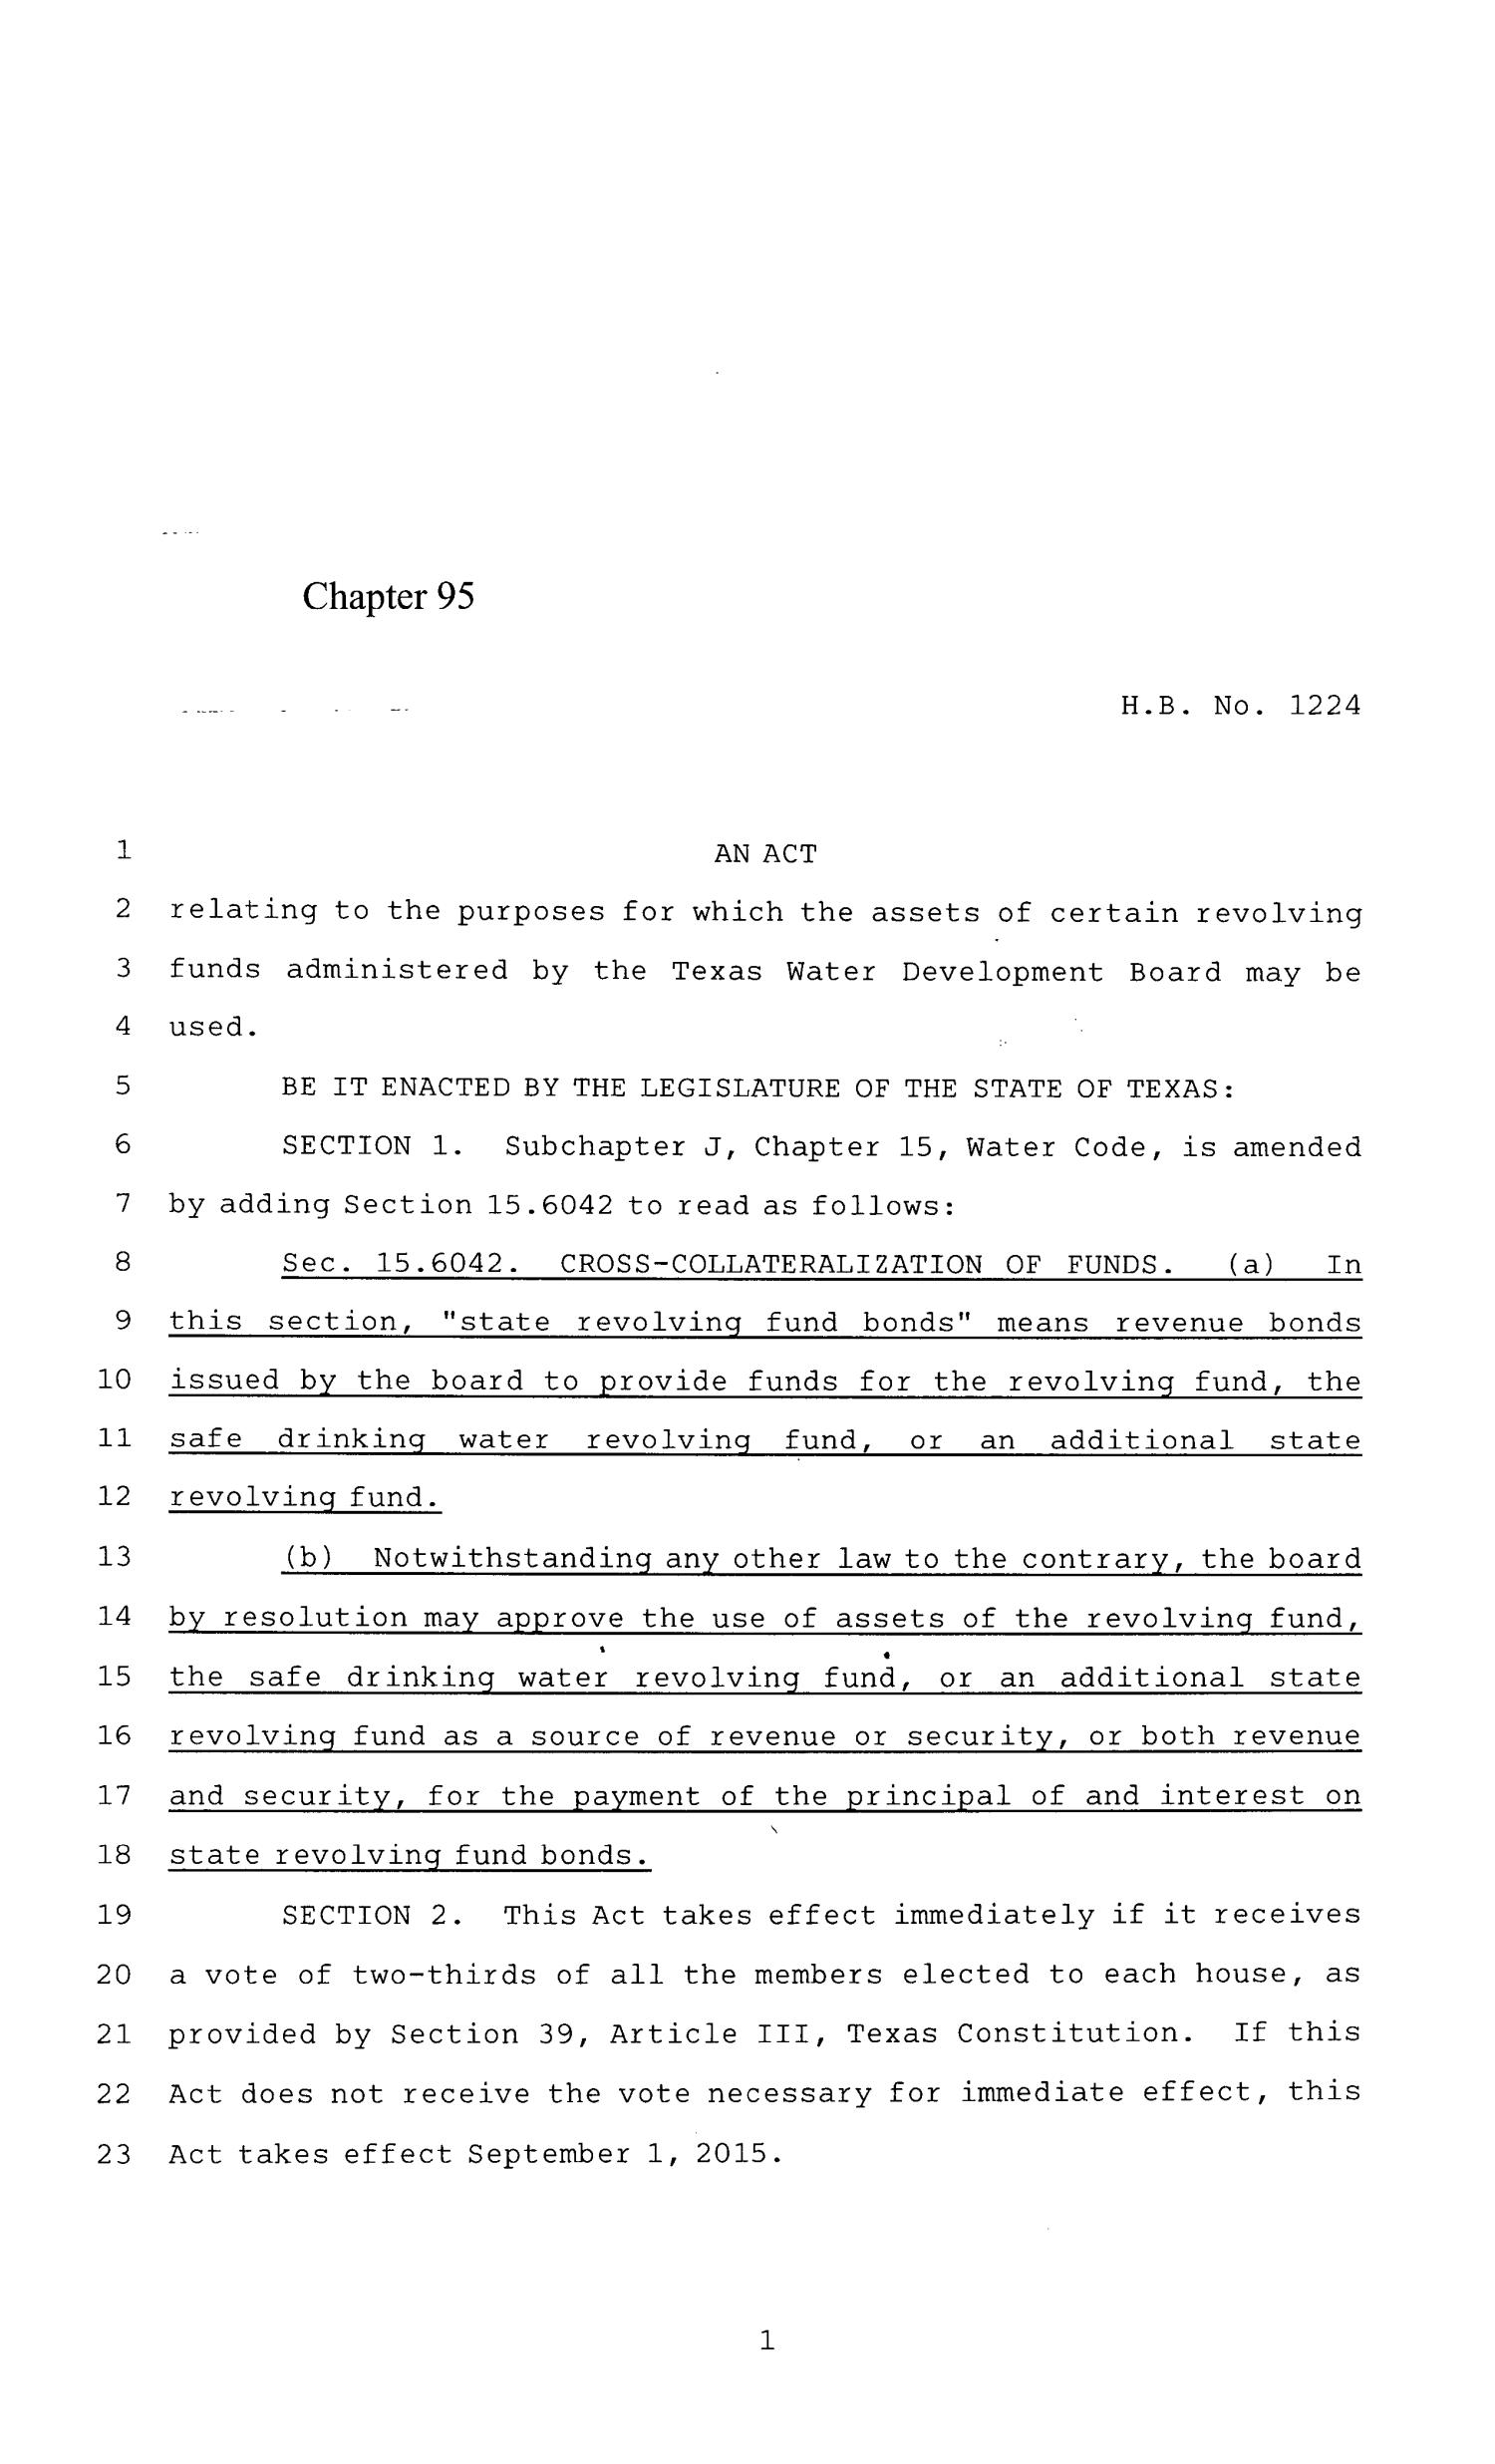 84th Texas Legislature, Regular Session, House Bill 1224, Chapter 95
                                                
                                                    [Sequence #]: 1 of 4
                                                